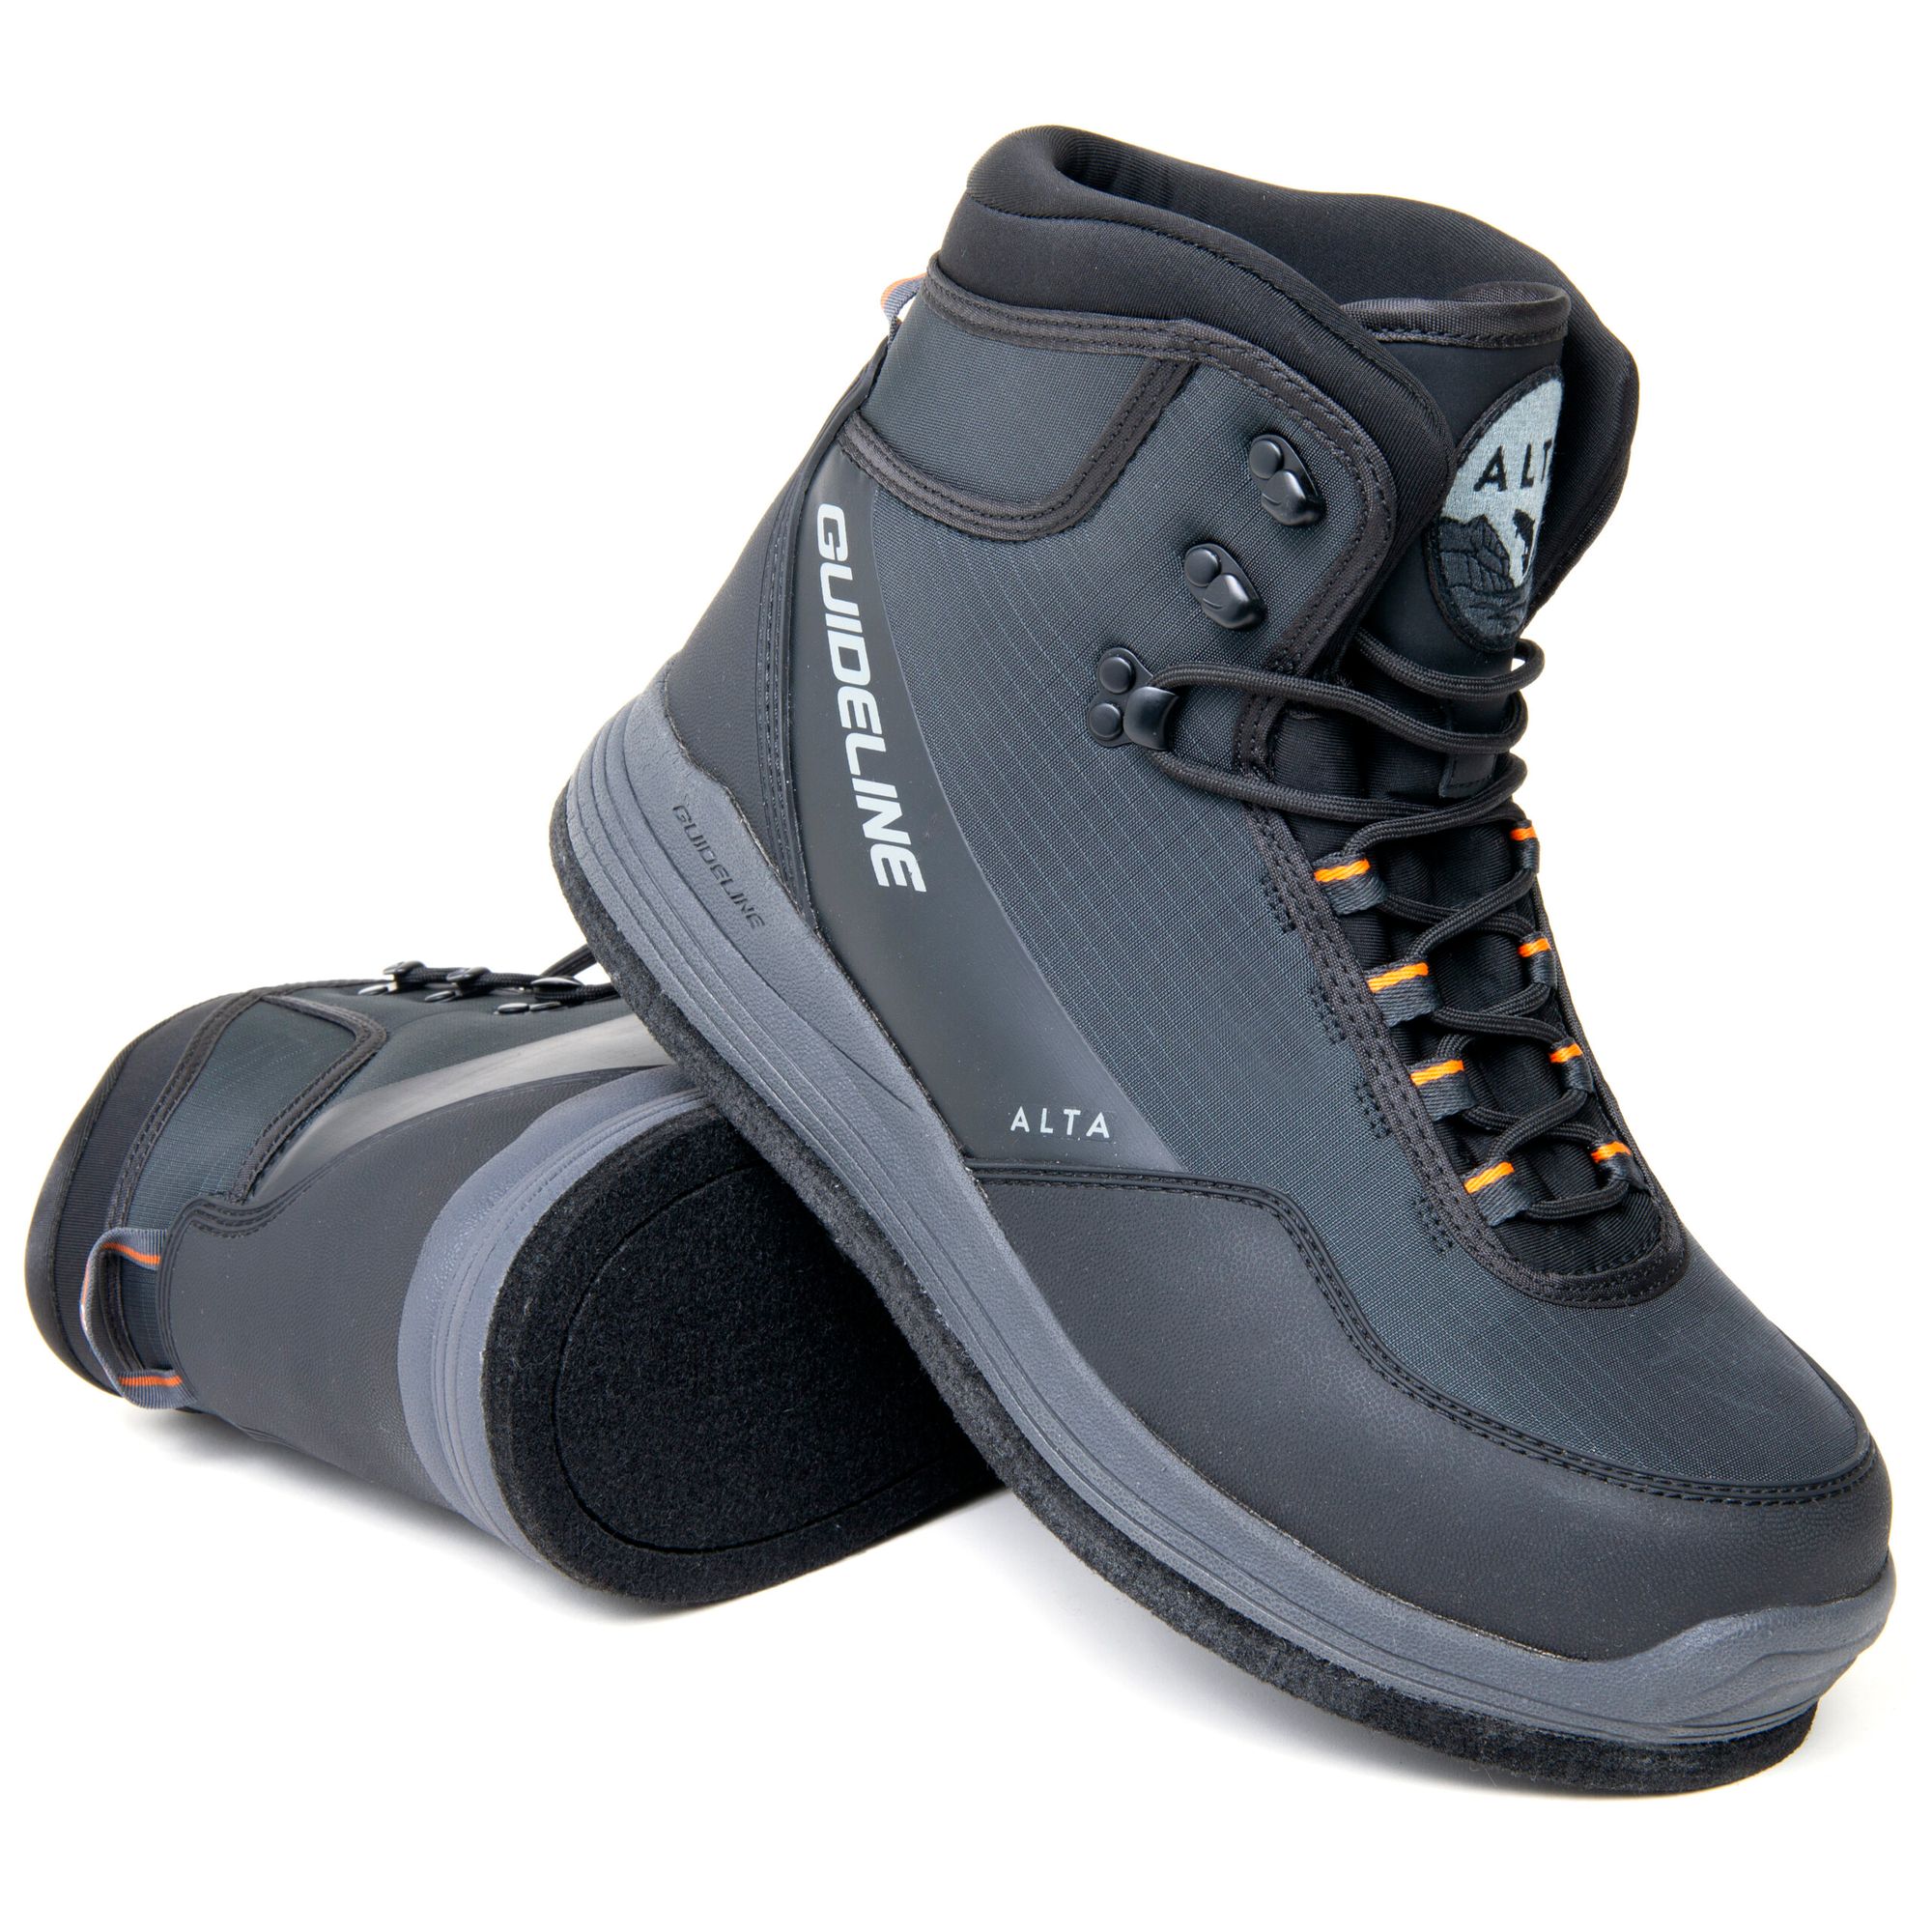 Guideline Alta NGx Felt Wading Boot - Fin & Game